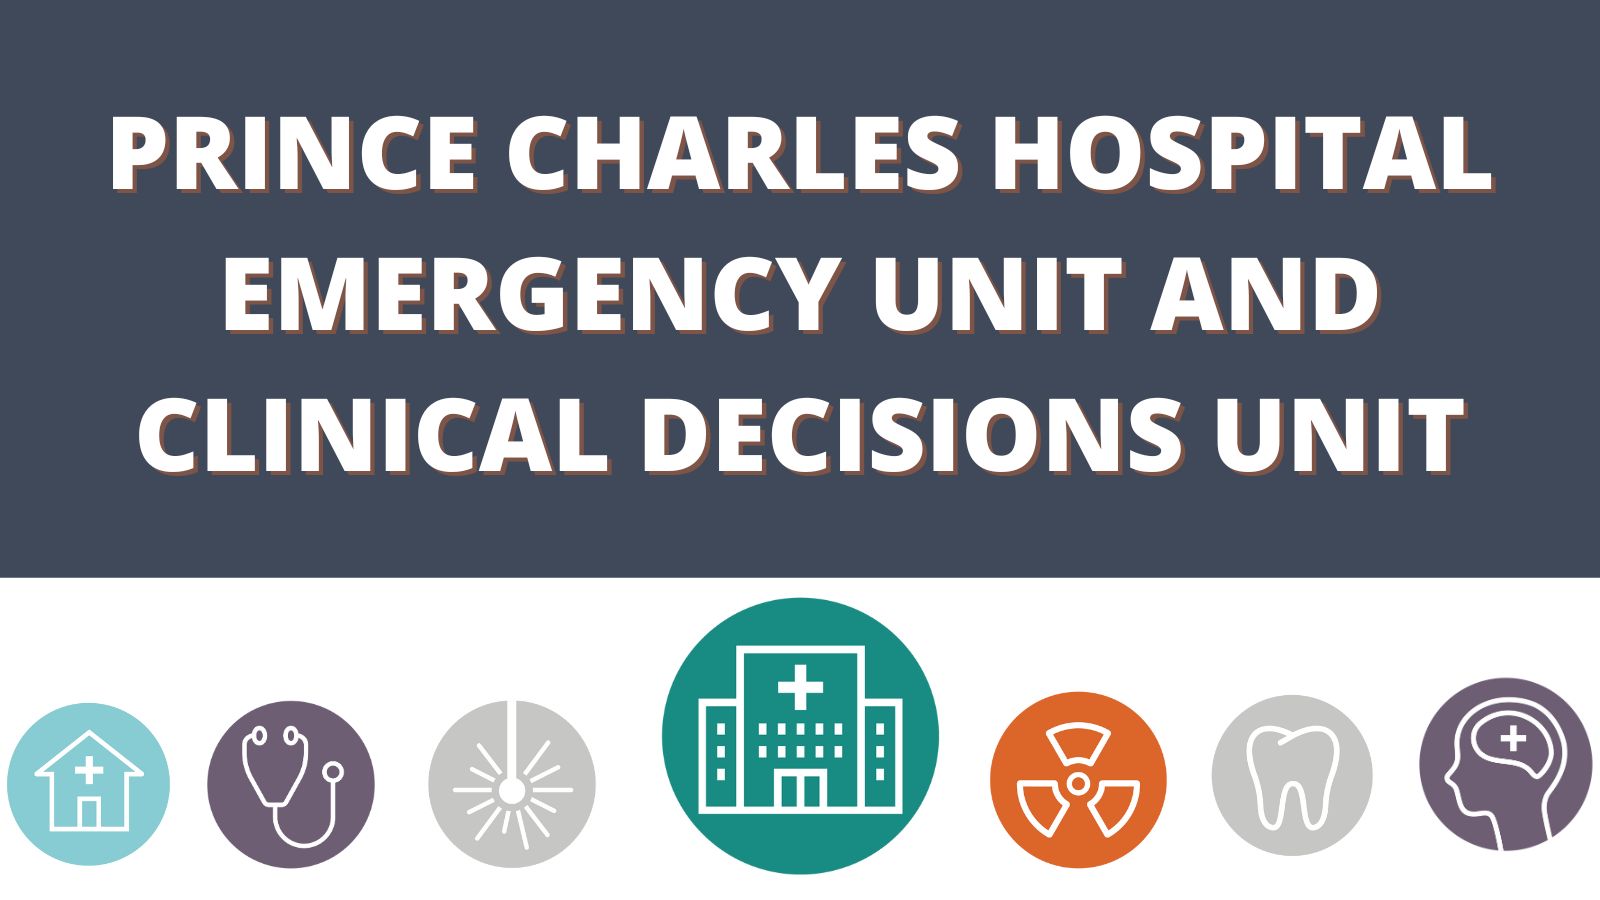 Prince Charles Hospital Emergency Unit and clinical decisions unit 